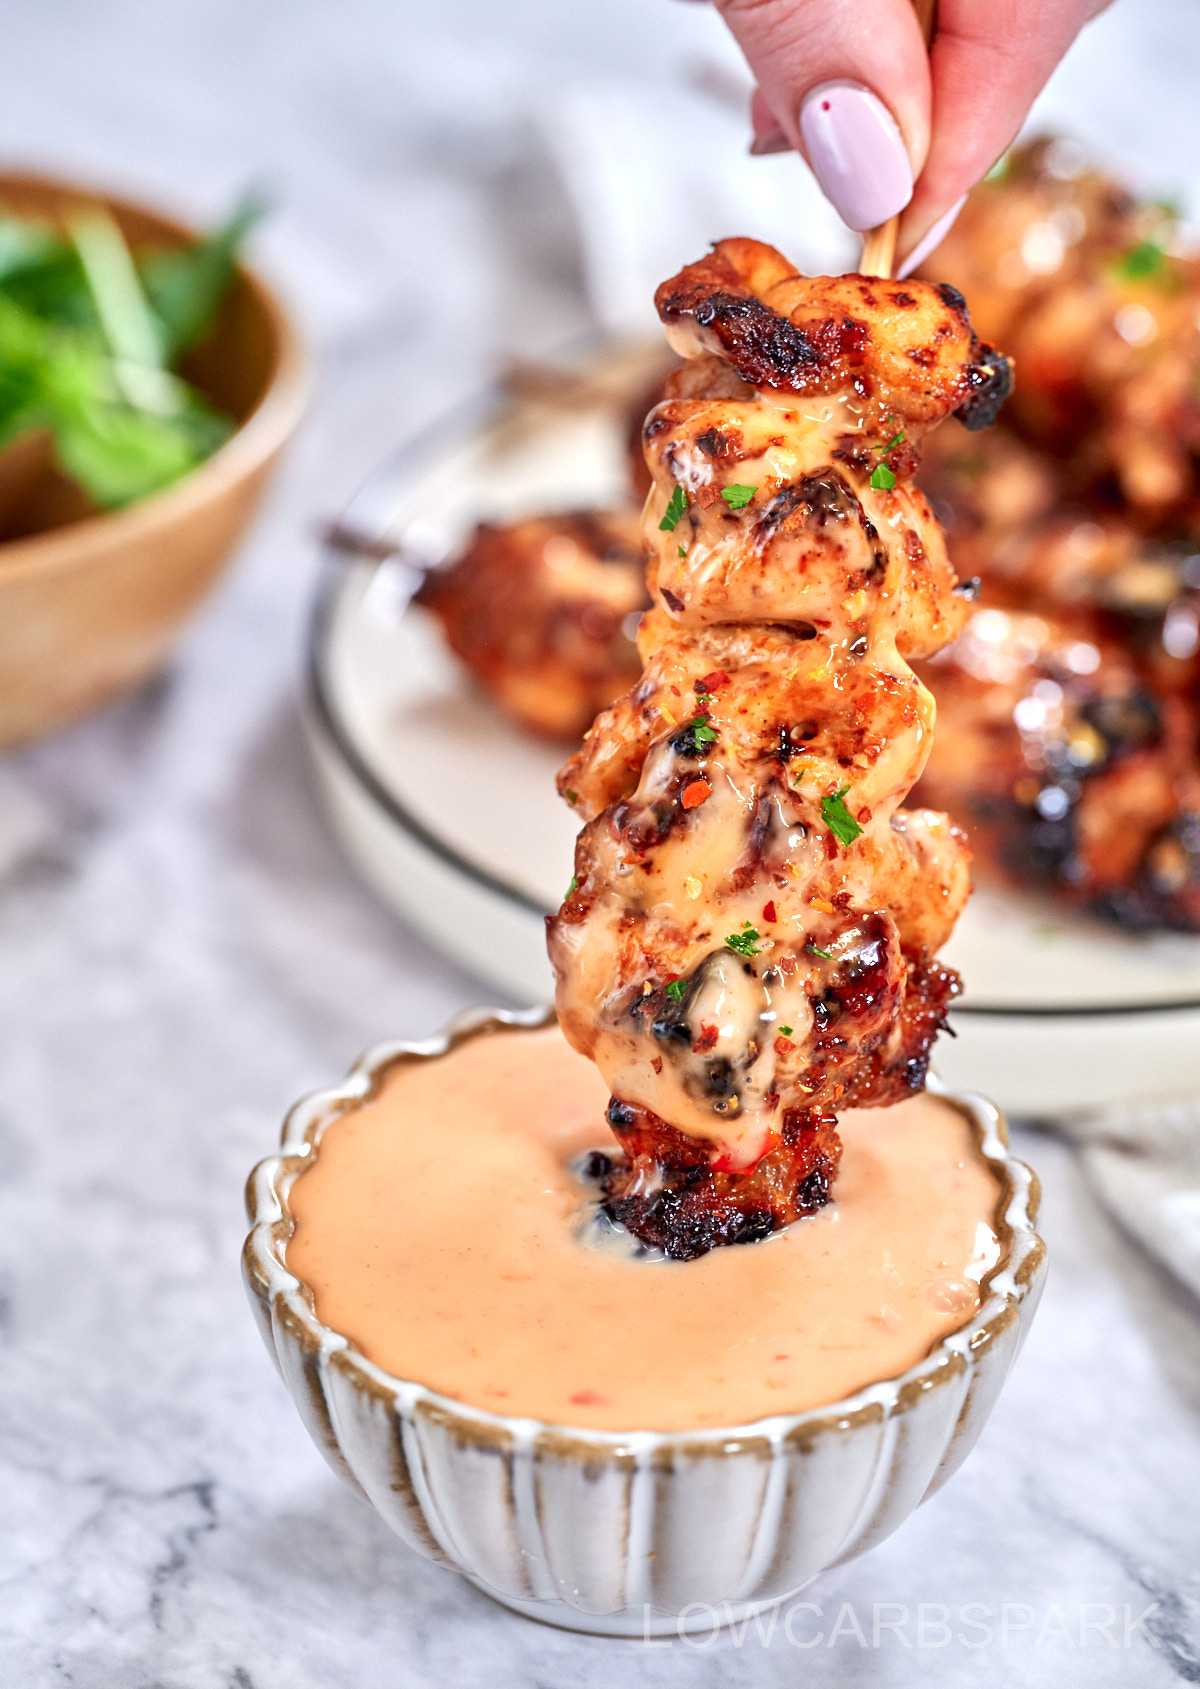 A hand with pink nails holds a chicken skewer over a small bowl of pink sauce. The cooked chicken has bits of green herbs and some charred spots. More skewers and a green salad are out of focus in the background. 